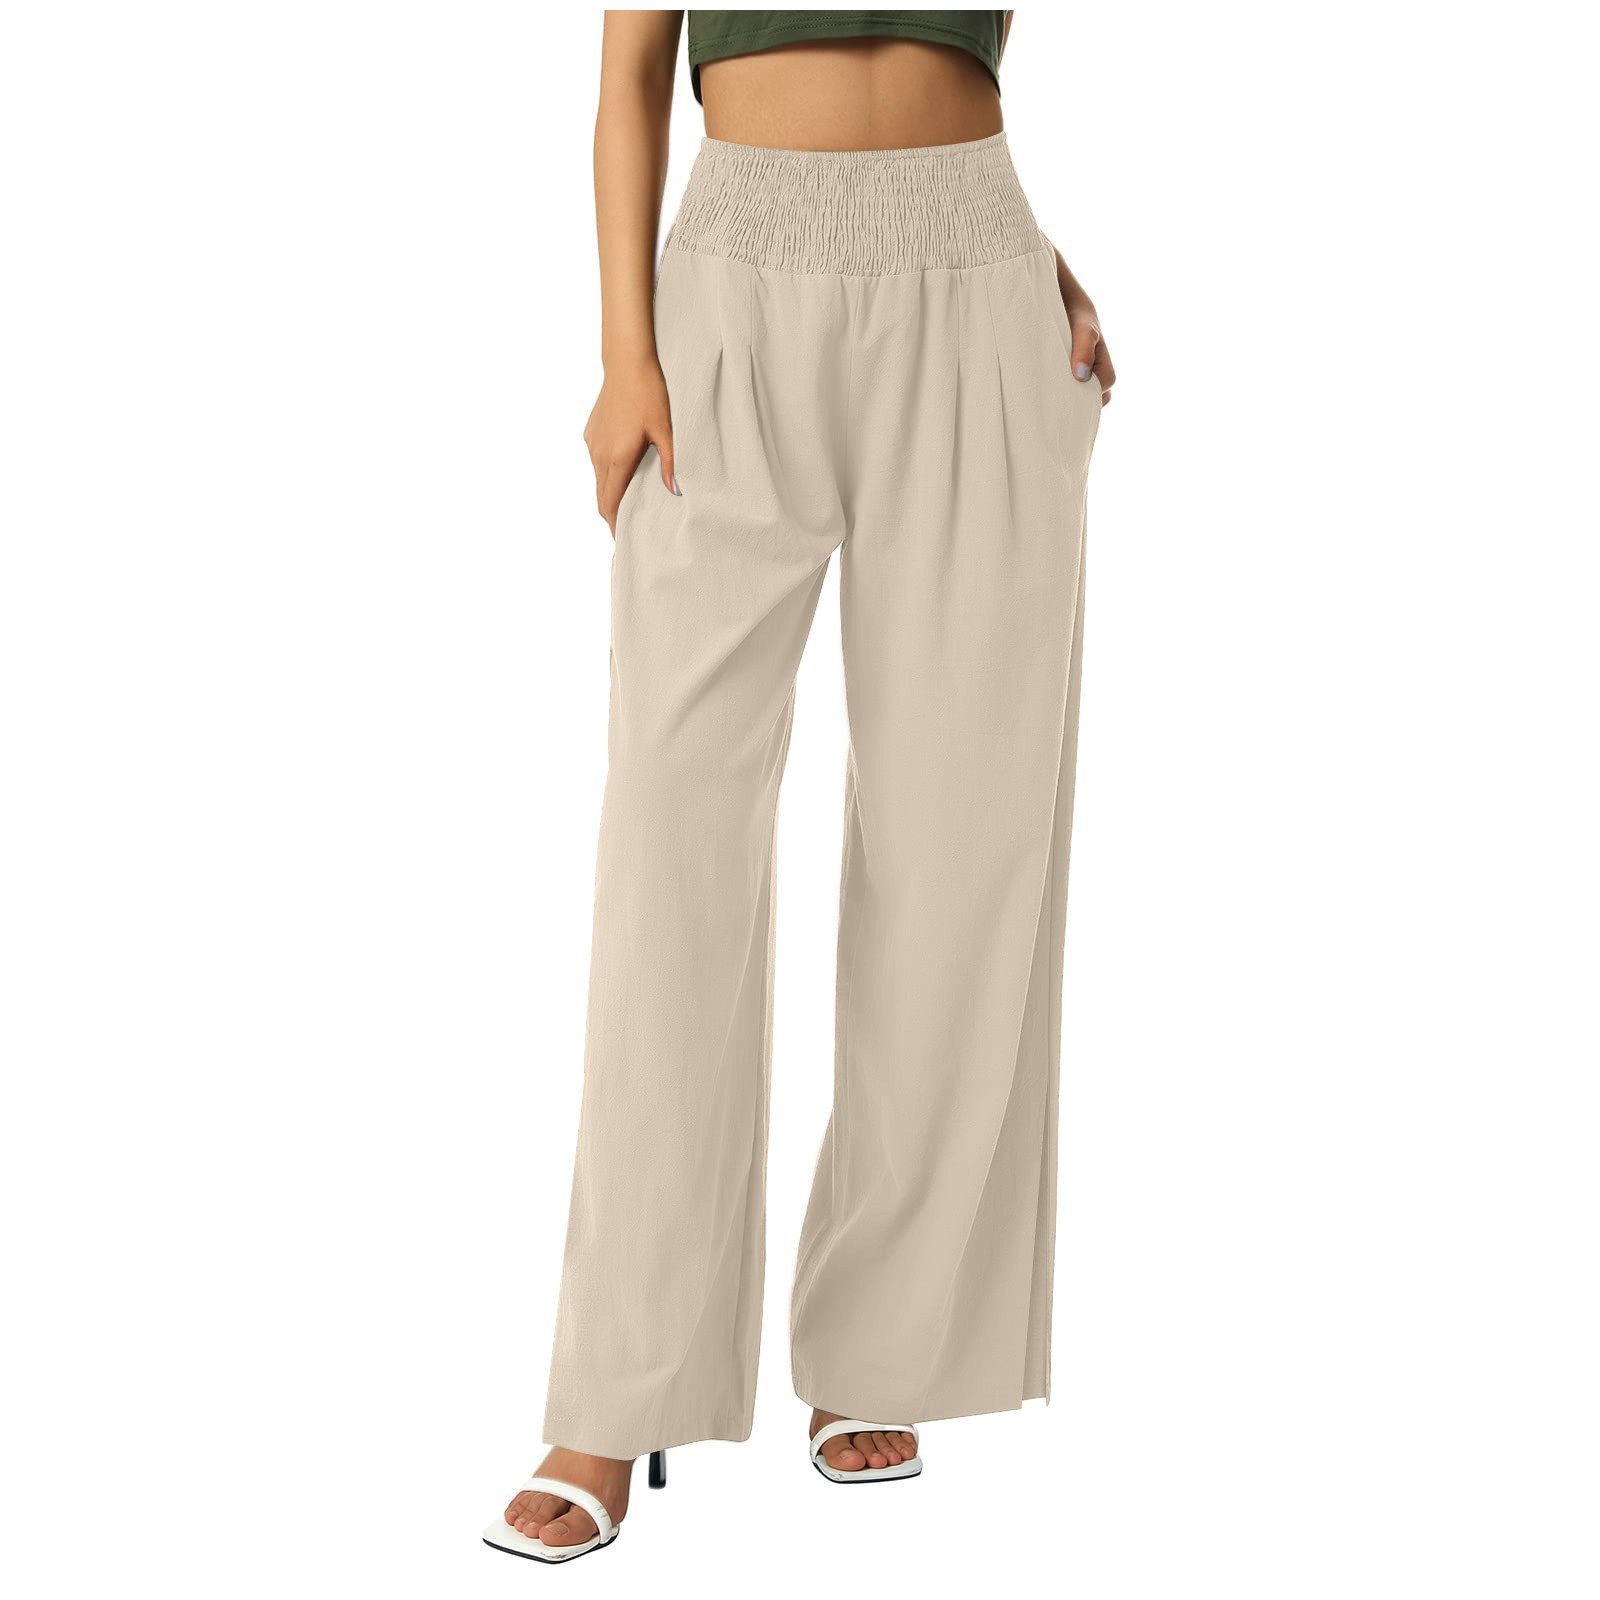 ylioge Women's Full Length Comfy Pants Palazzo High Waist Baggy Vacation  Trousers Flowy Wide Leg Solid Color Summer Pants Pantalones - Walmart.com